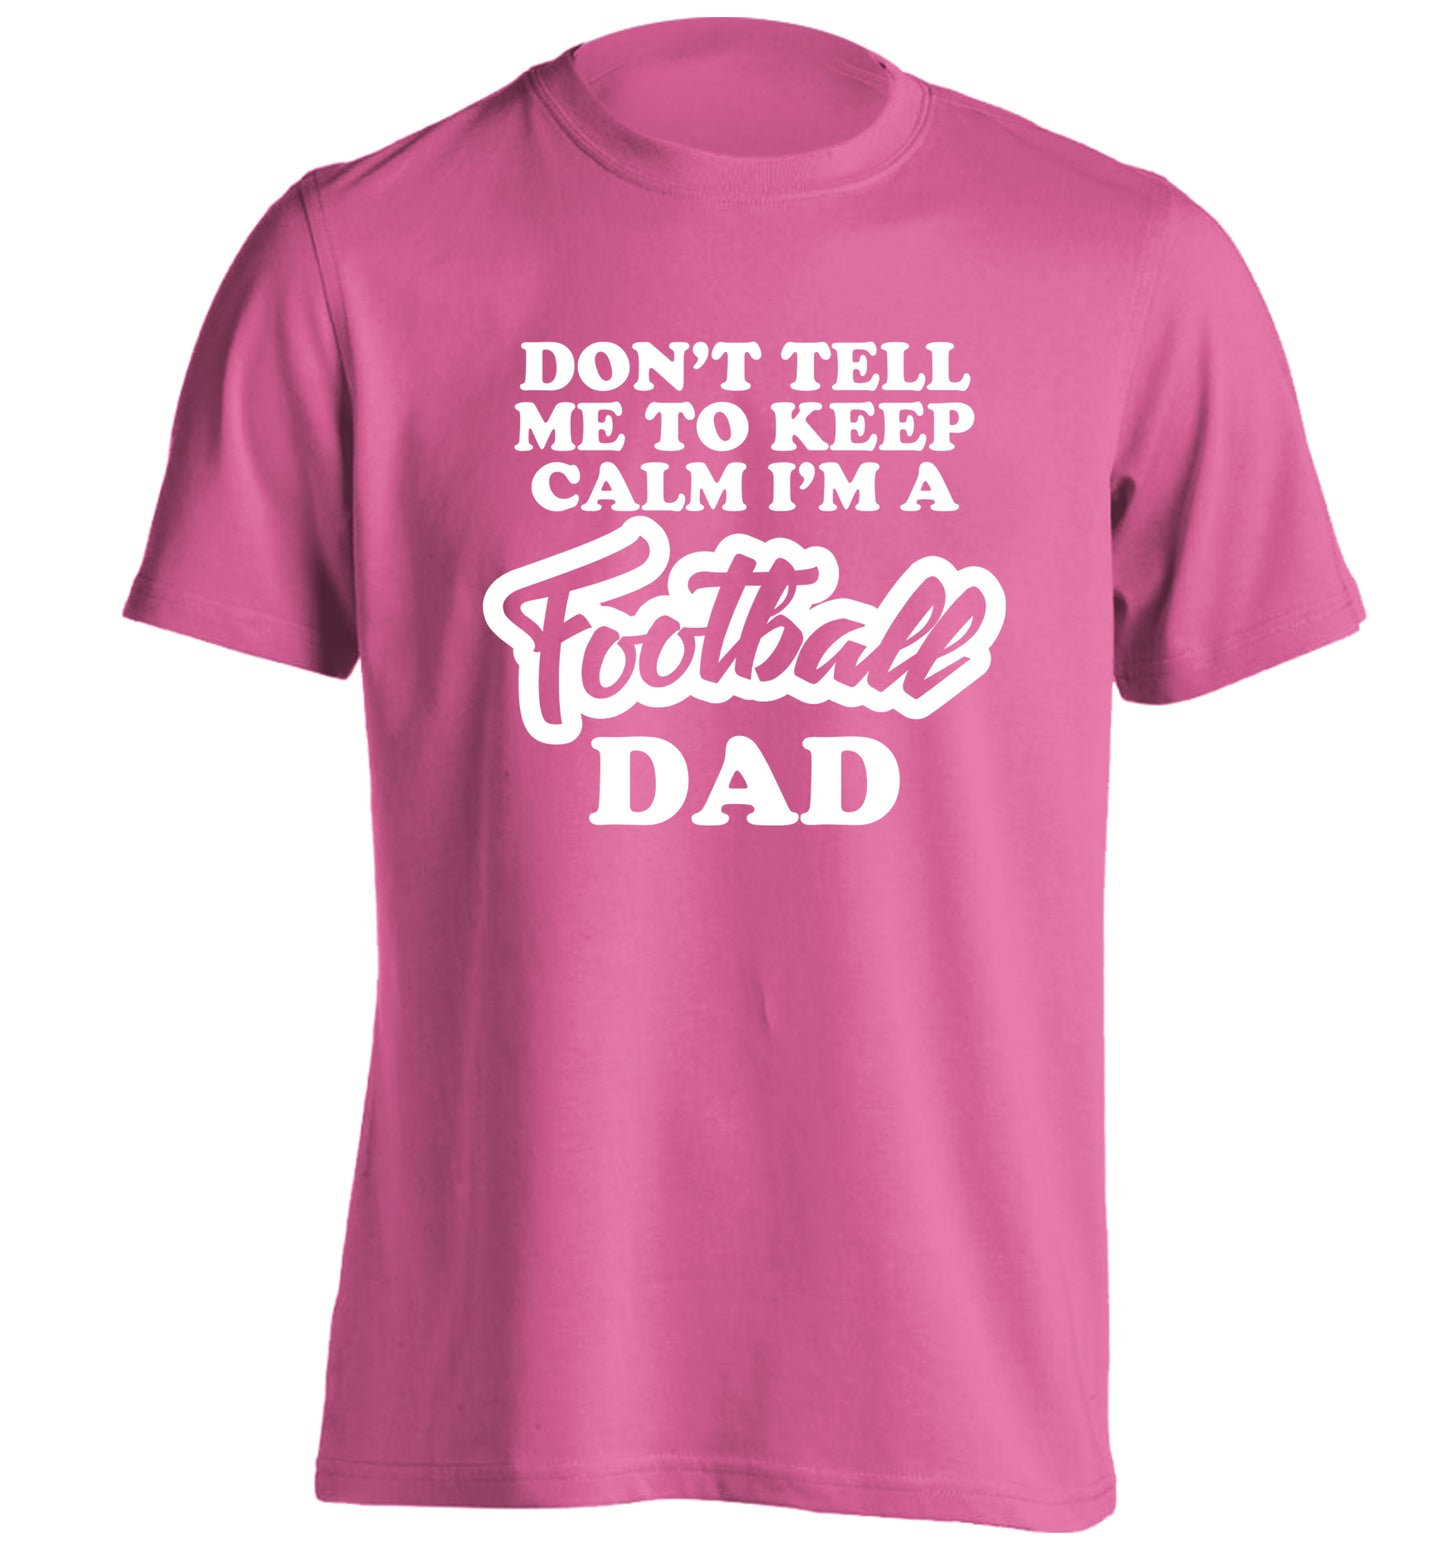 Don't tell me to keep calm I'm a football dad adults unisexpink Tshirt 2XL